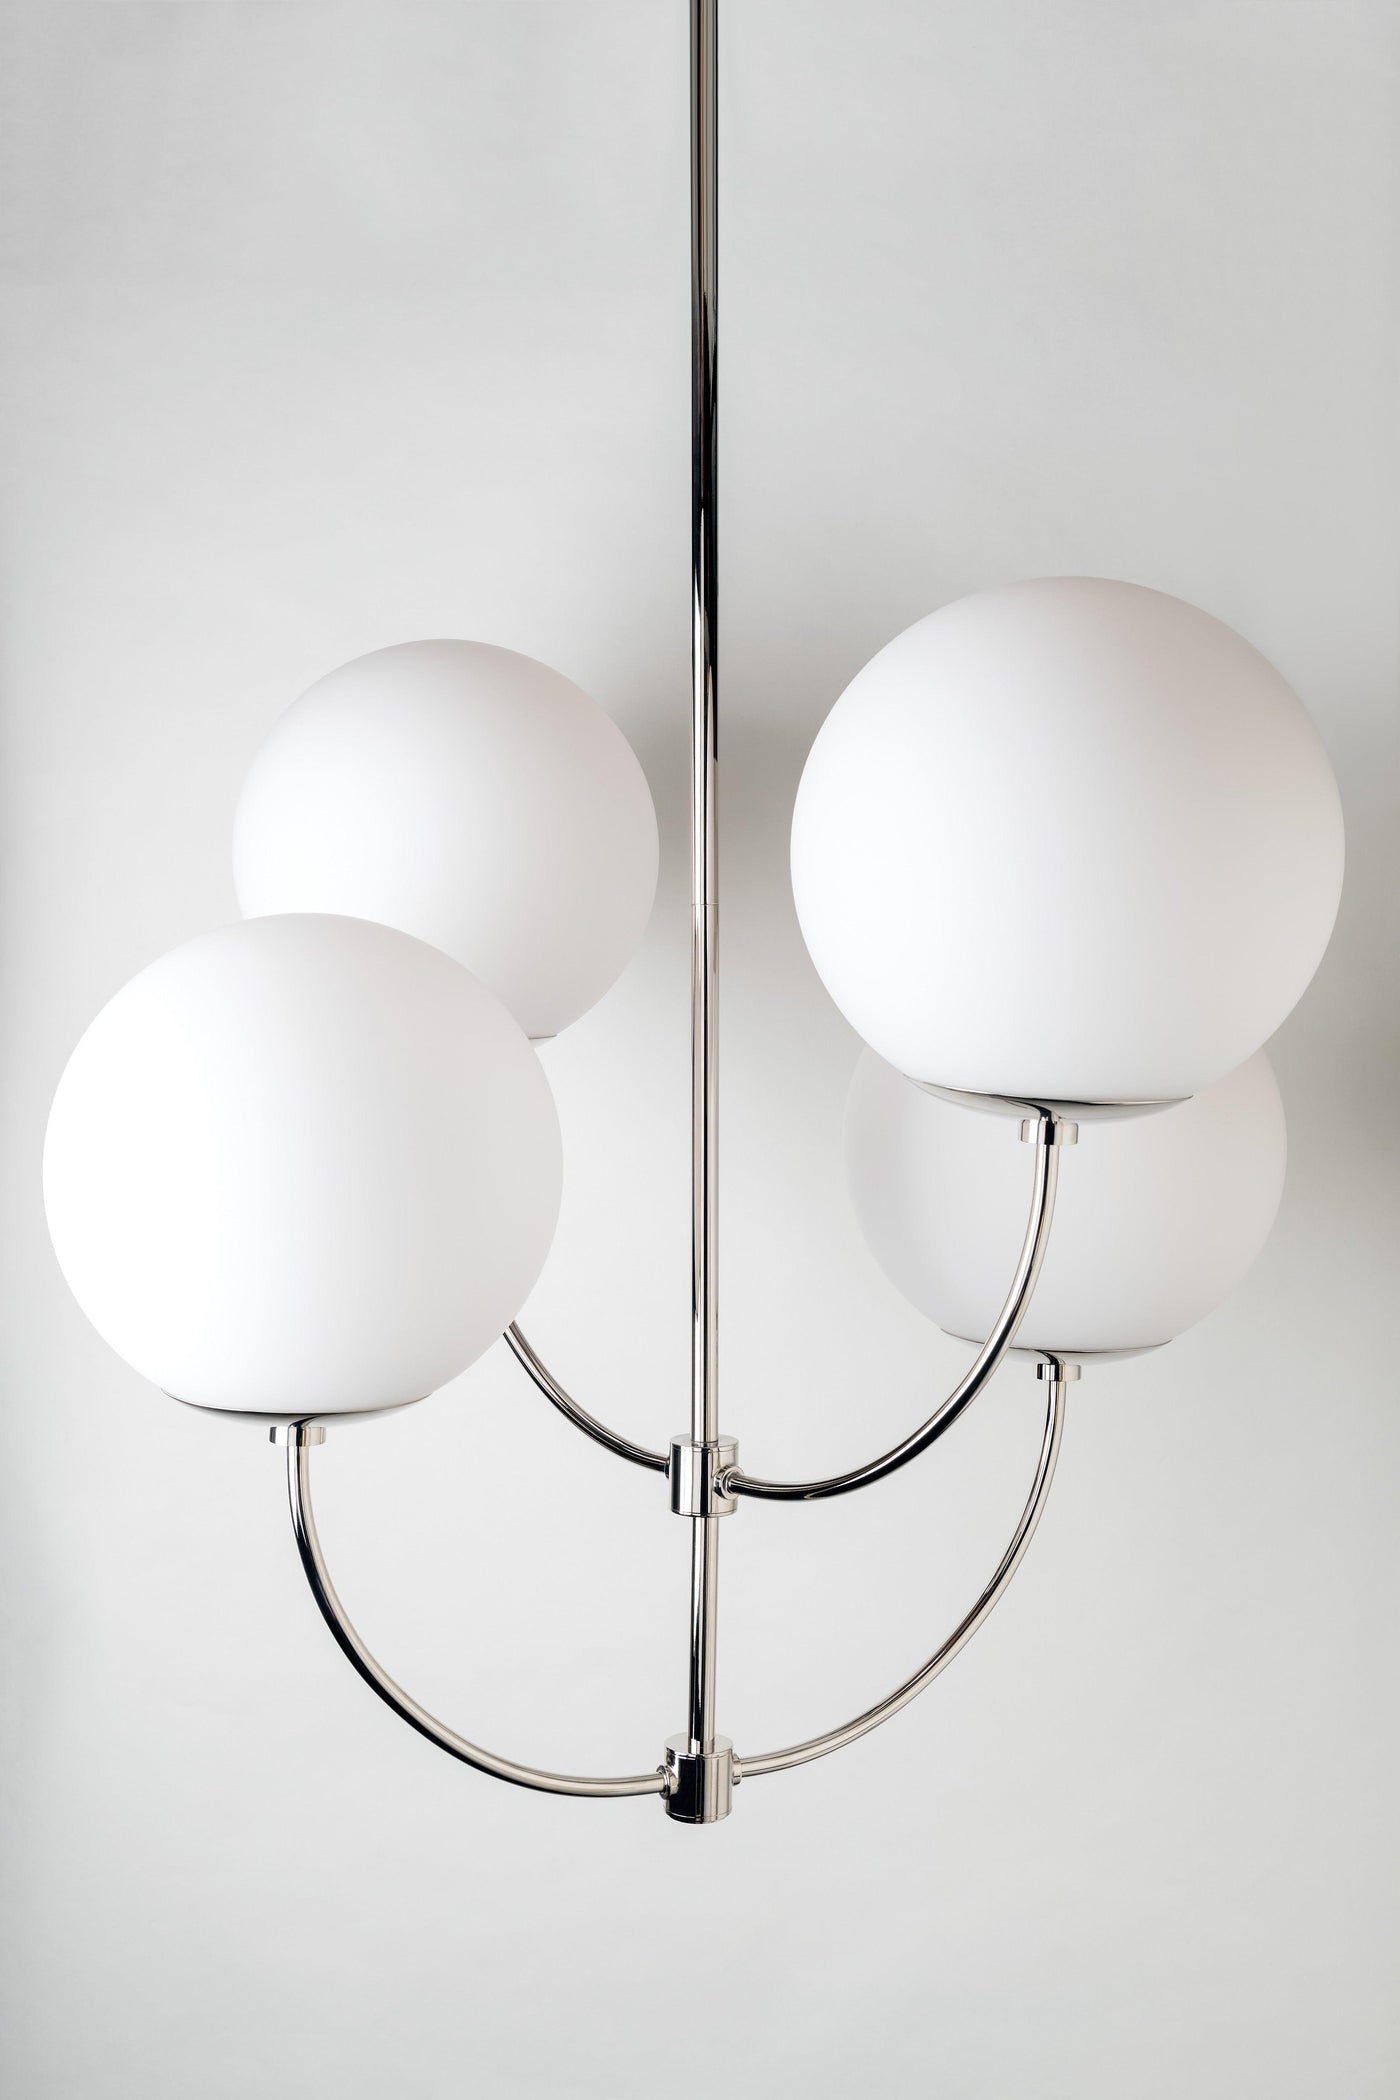 Steel Curve Arm with Frosted Shade Globe Chandelier - LV LIGHTING